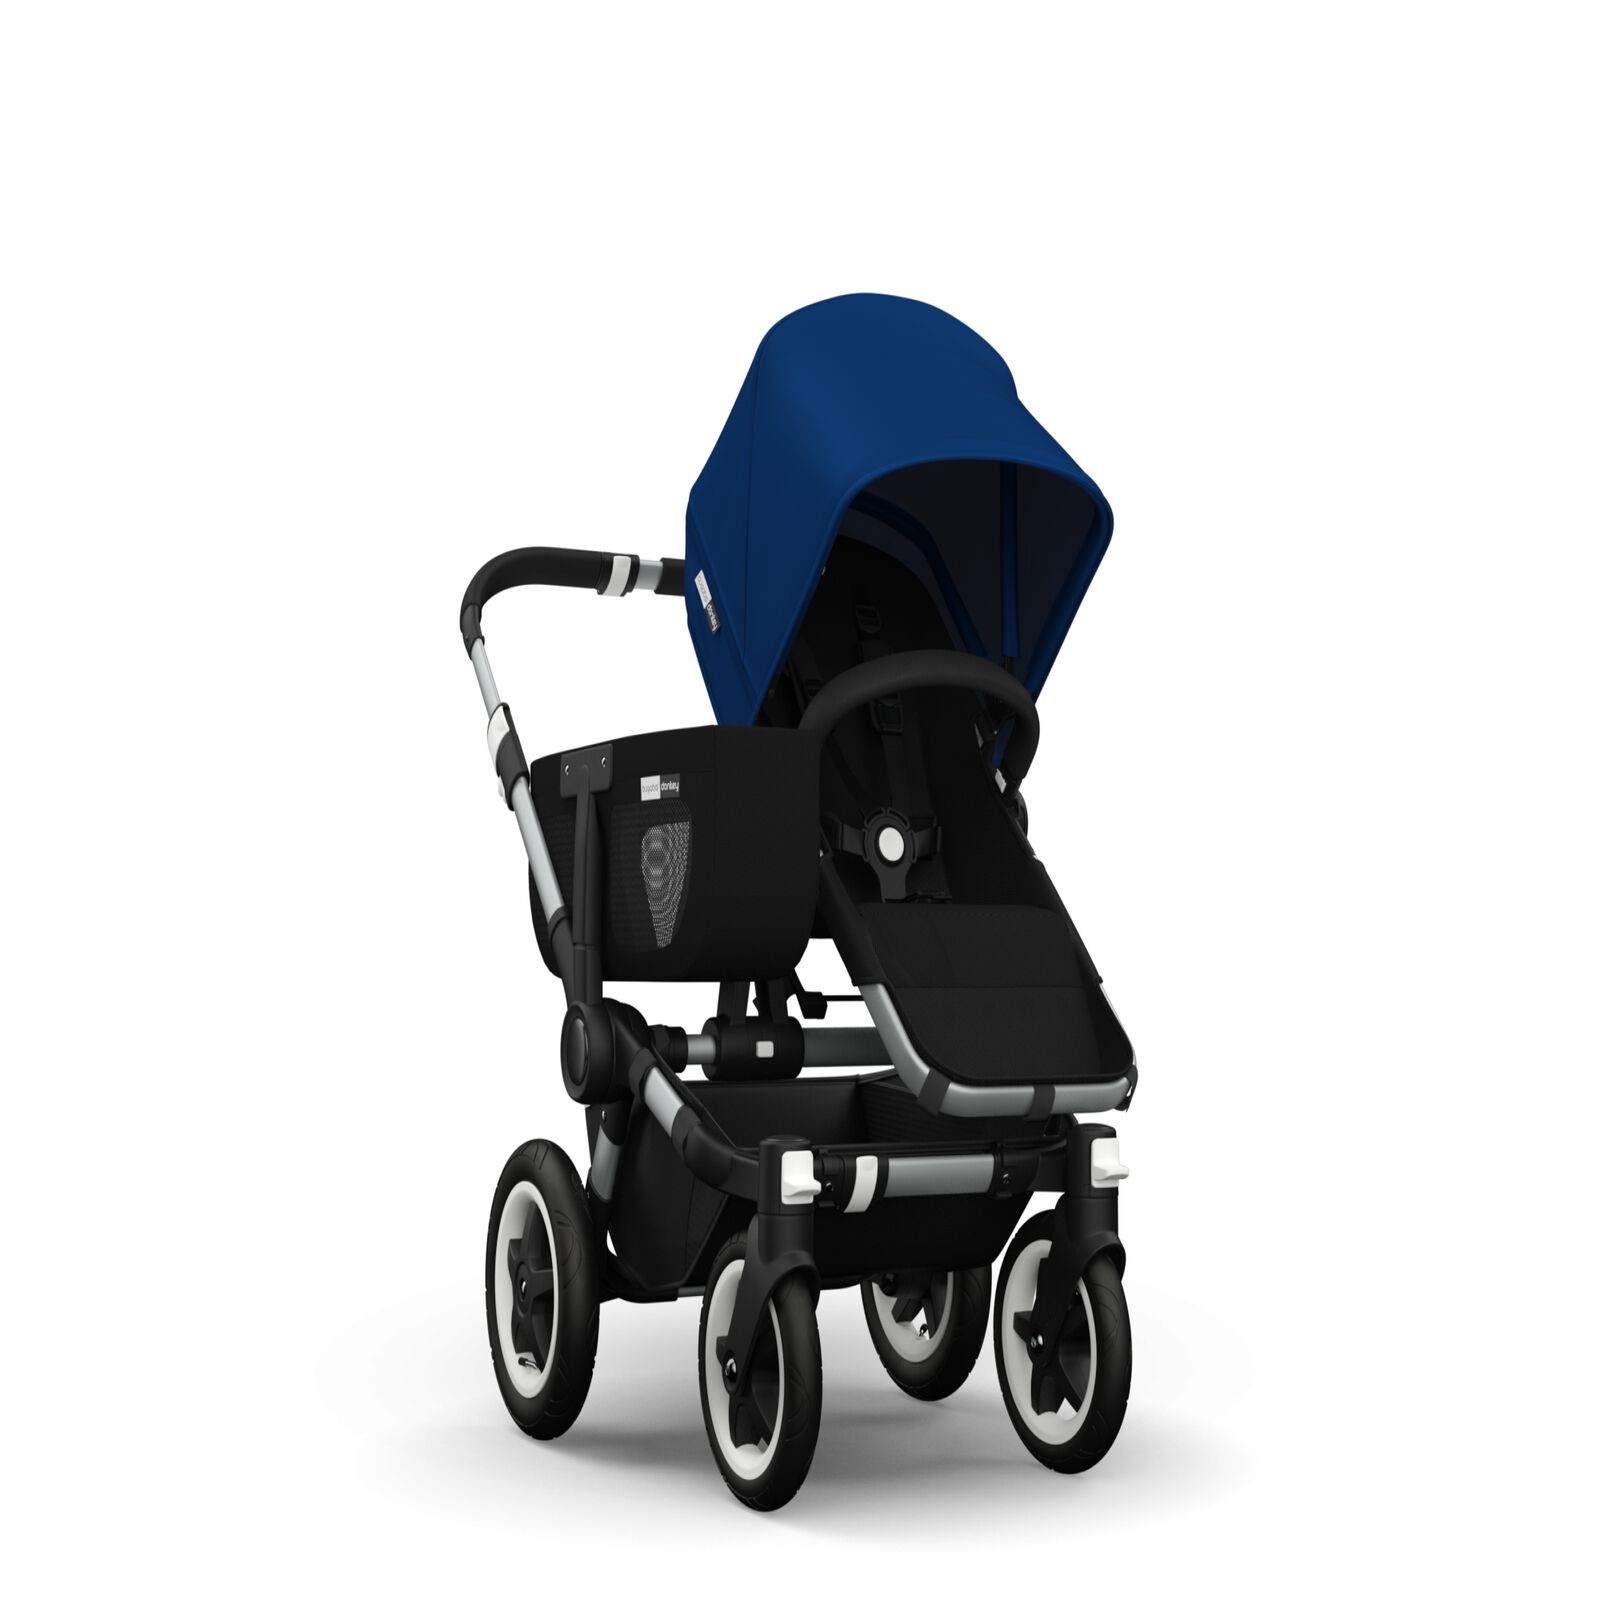 Bugaboo Donkey sun canopy (non-extendable) - View 1